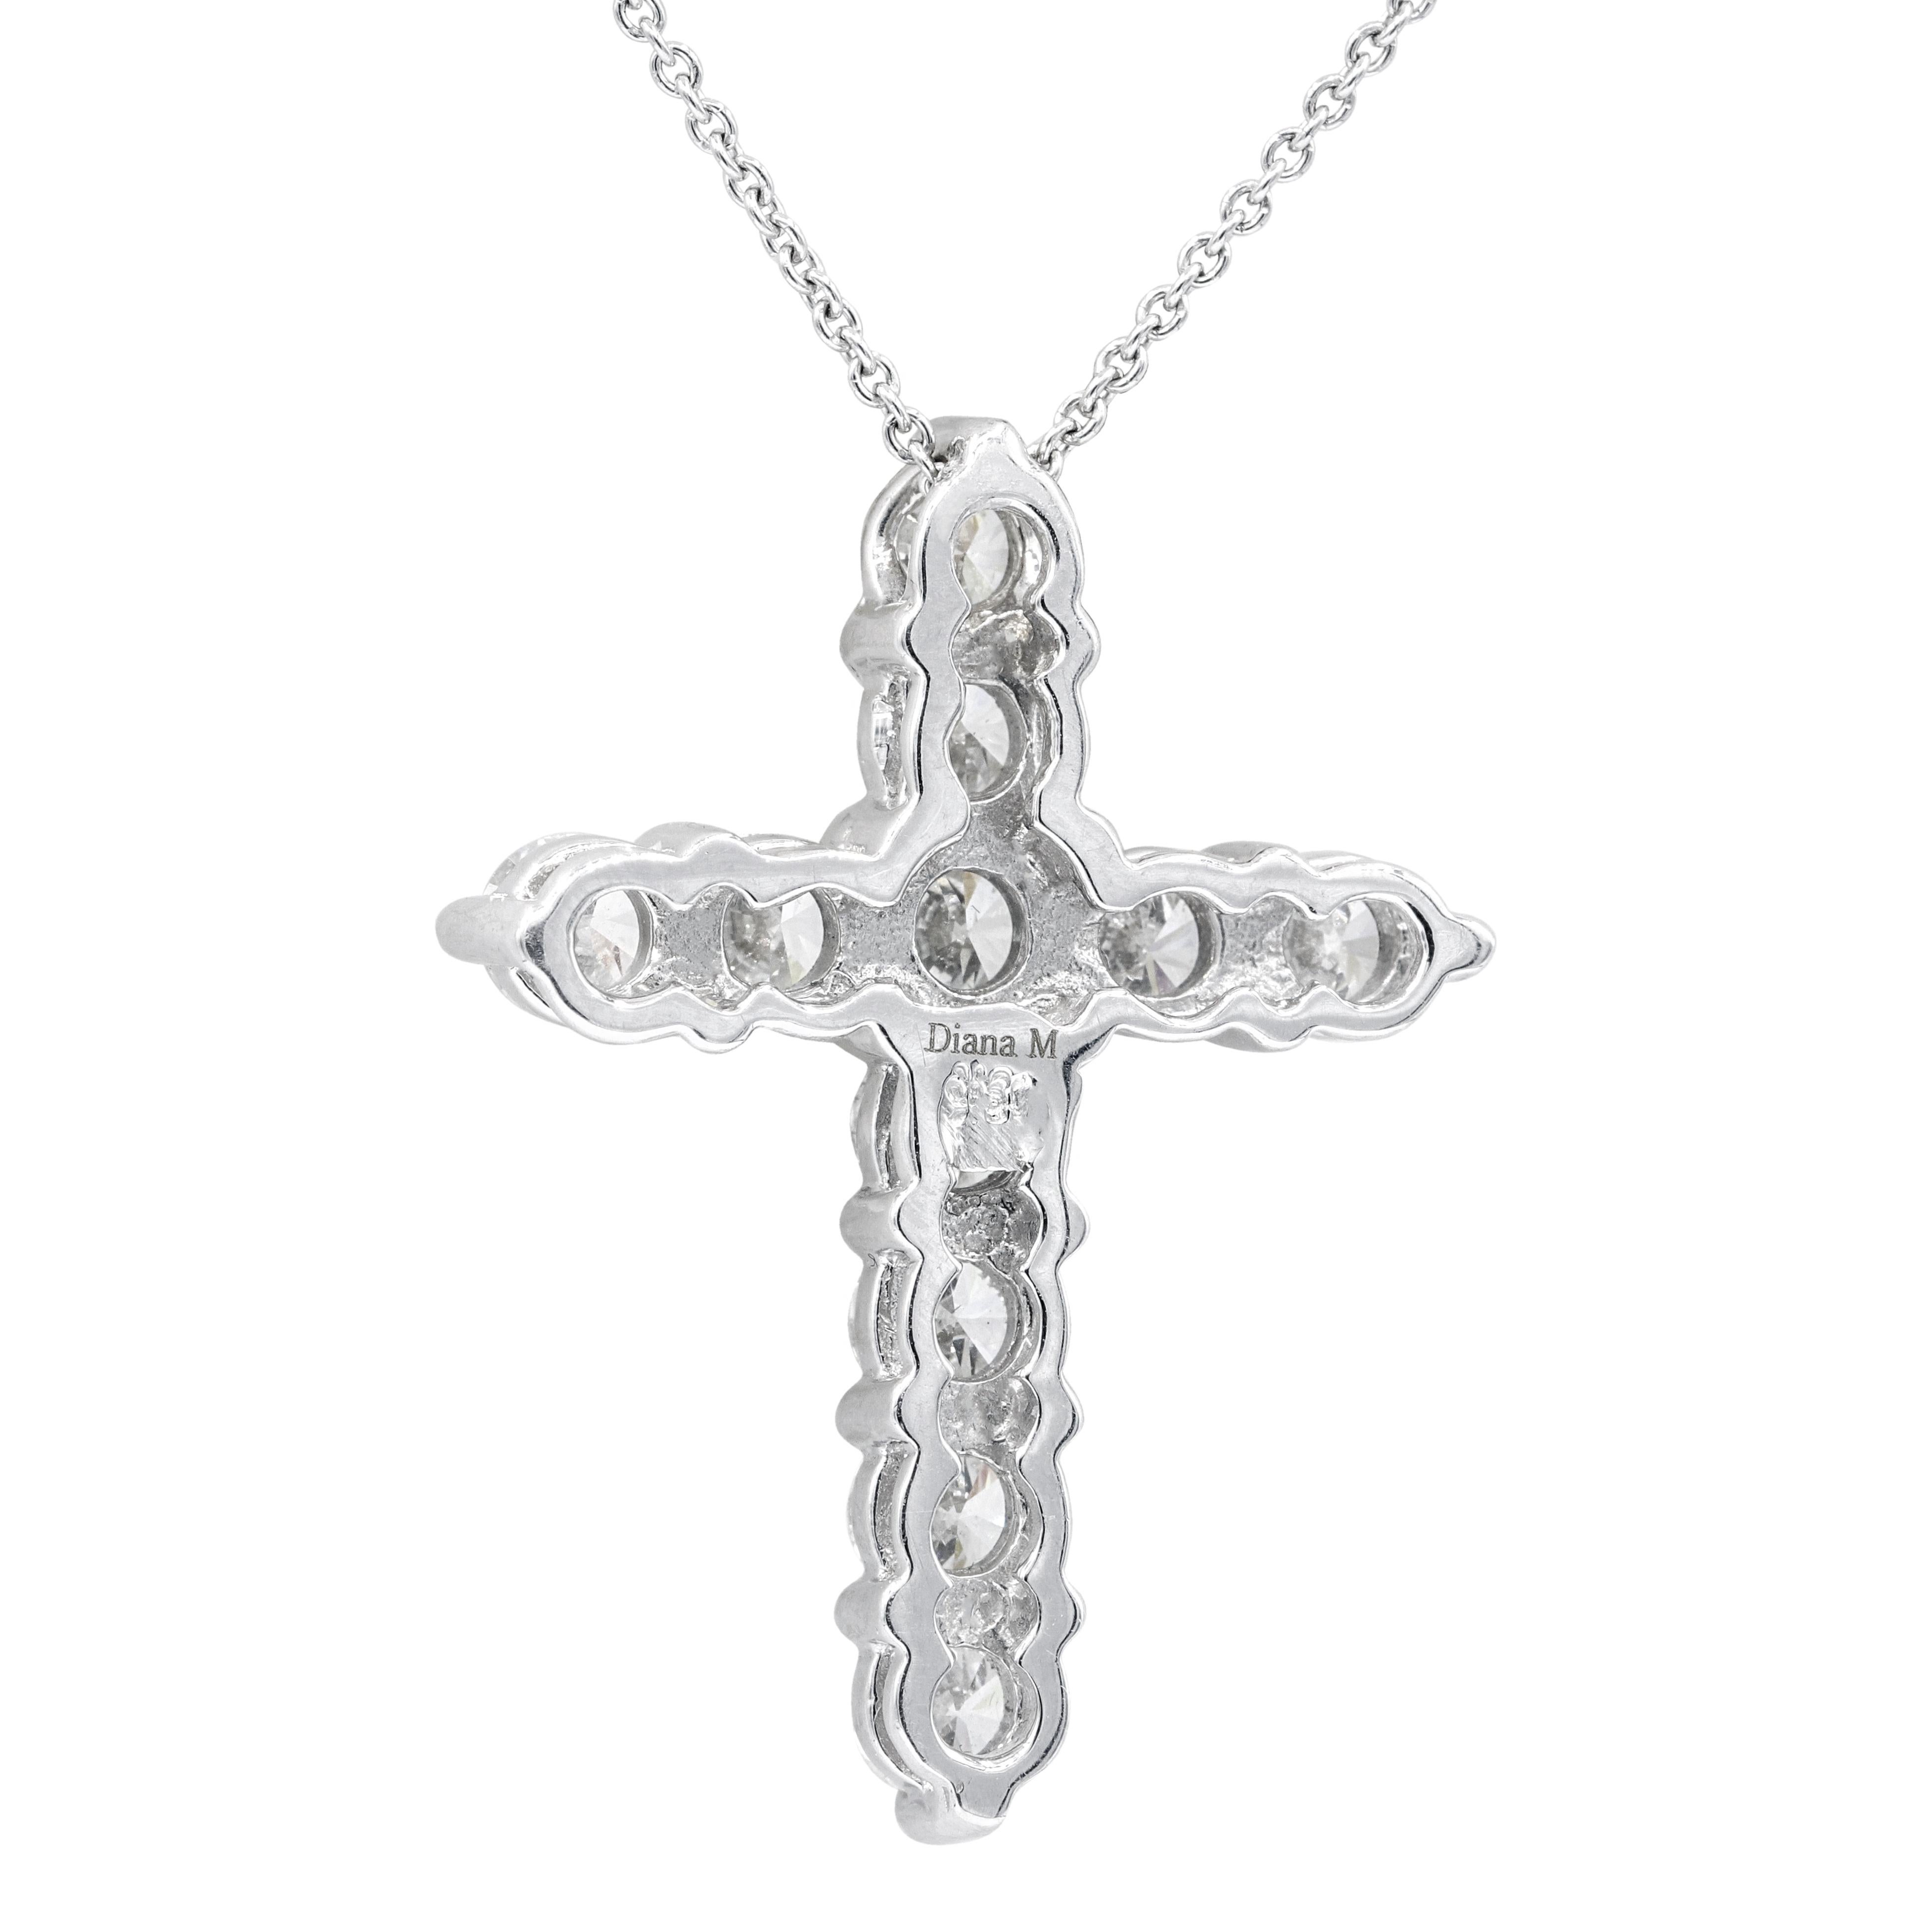 18KT white gold diamond cross pendant with the chain, features 3.10 ct of 11 round diamonds
Size: 1